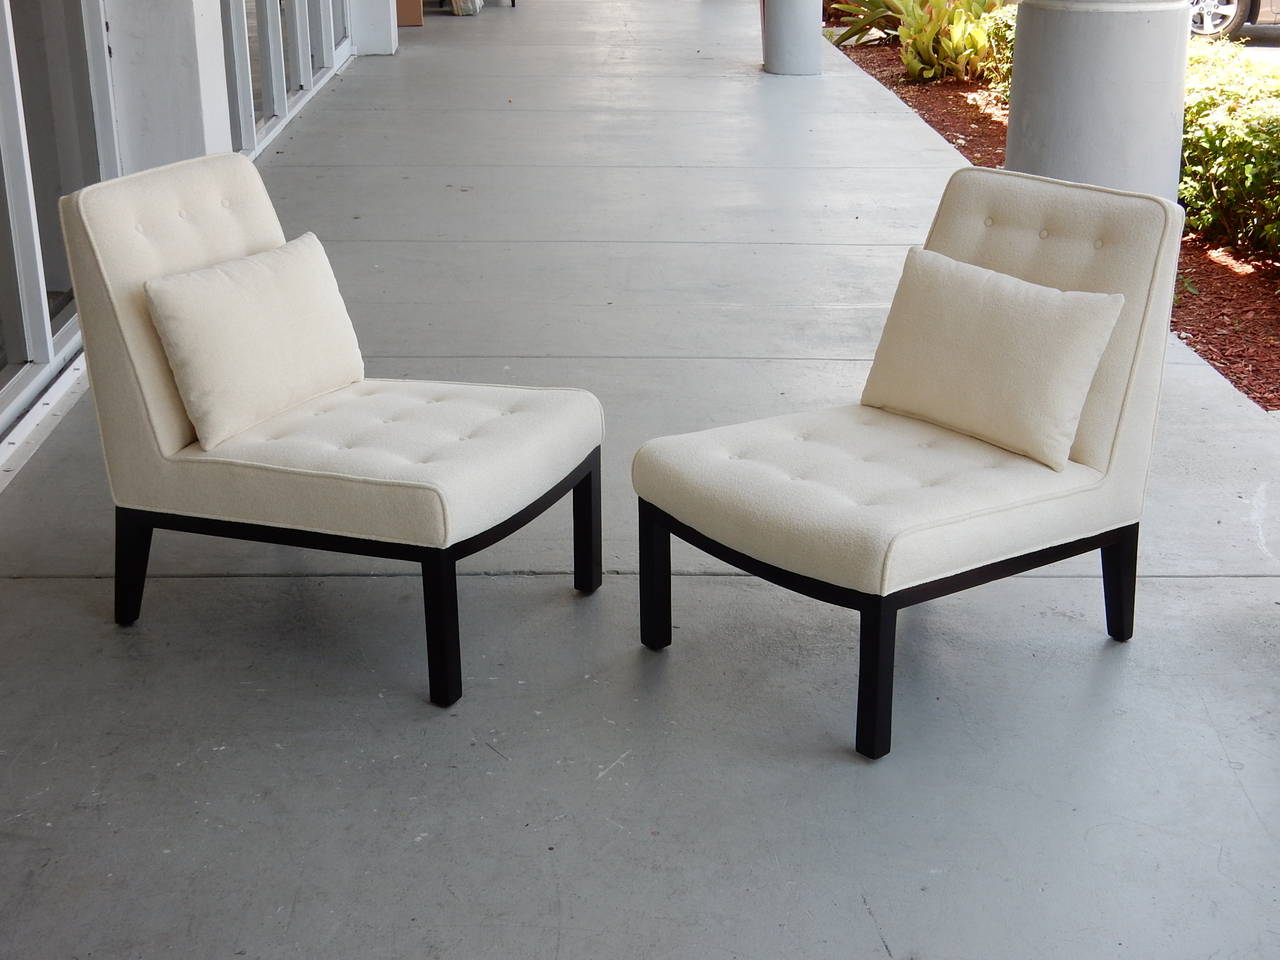 Chic pair of chairs by Edward Wormley for Dunbar. Wood frame and upholstered seats and backs. Lots of subtle sophisticated detail. Note the trapezoid back that also curves at the top, as well as the curve at the front of the seats. Very comfortable